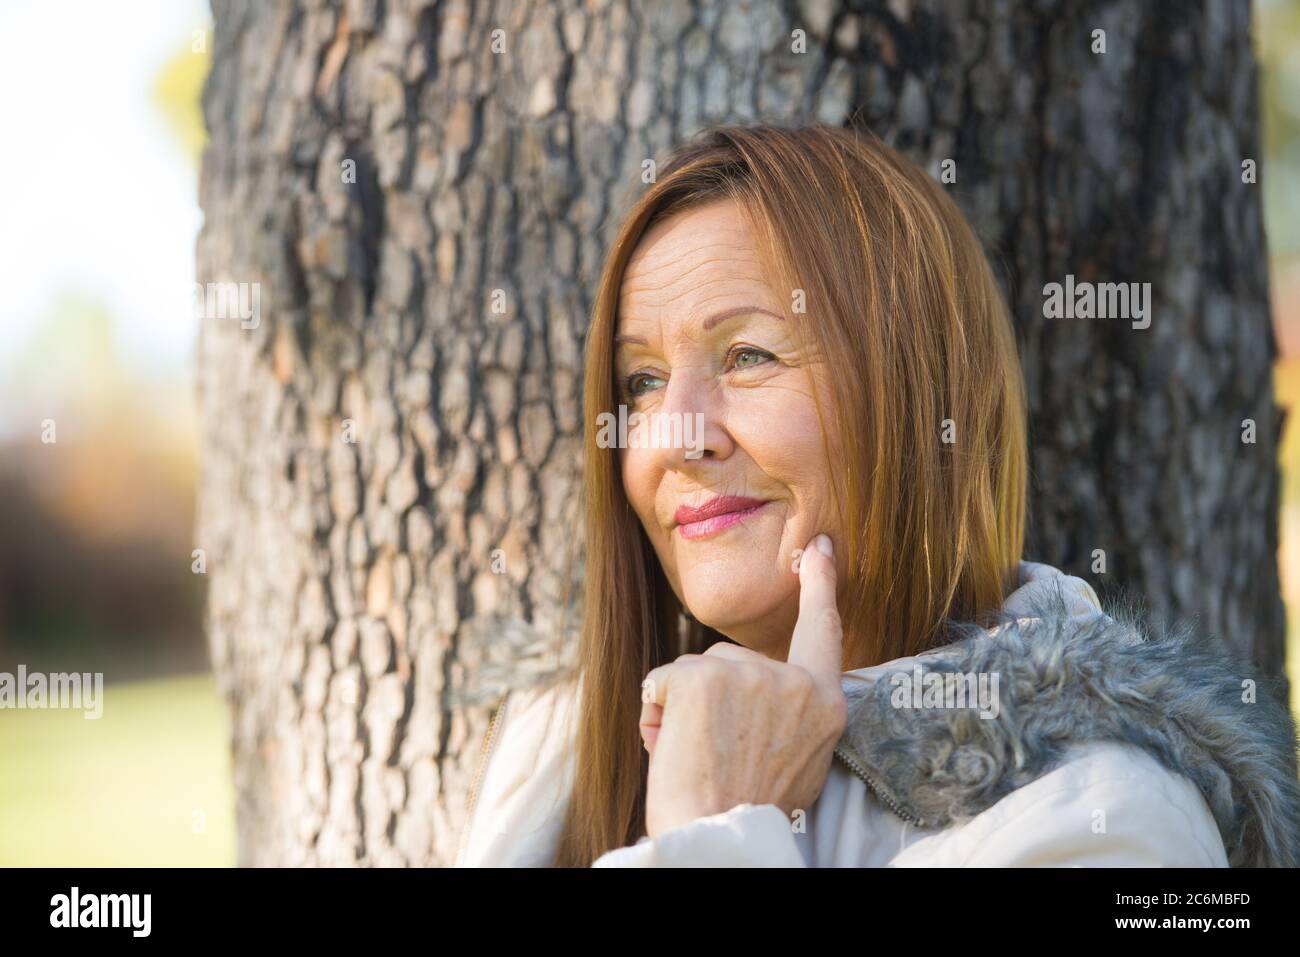 Portrait attractive mature woman in warm jacket outdoor, posing happy relaxed, thoughtful, blurred background. Stock Photo